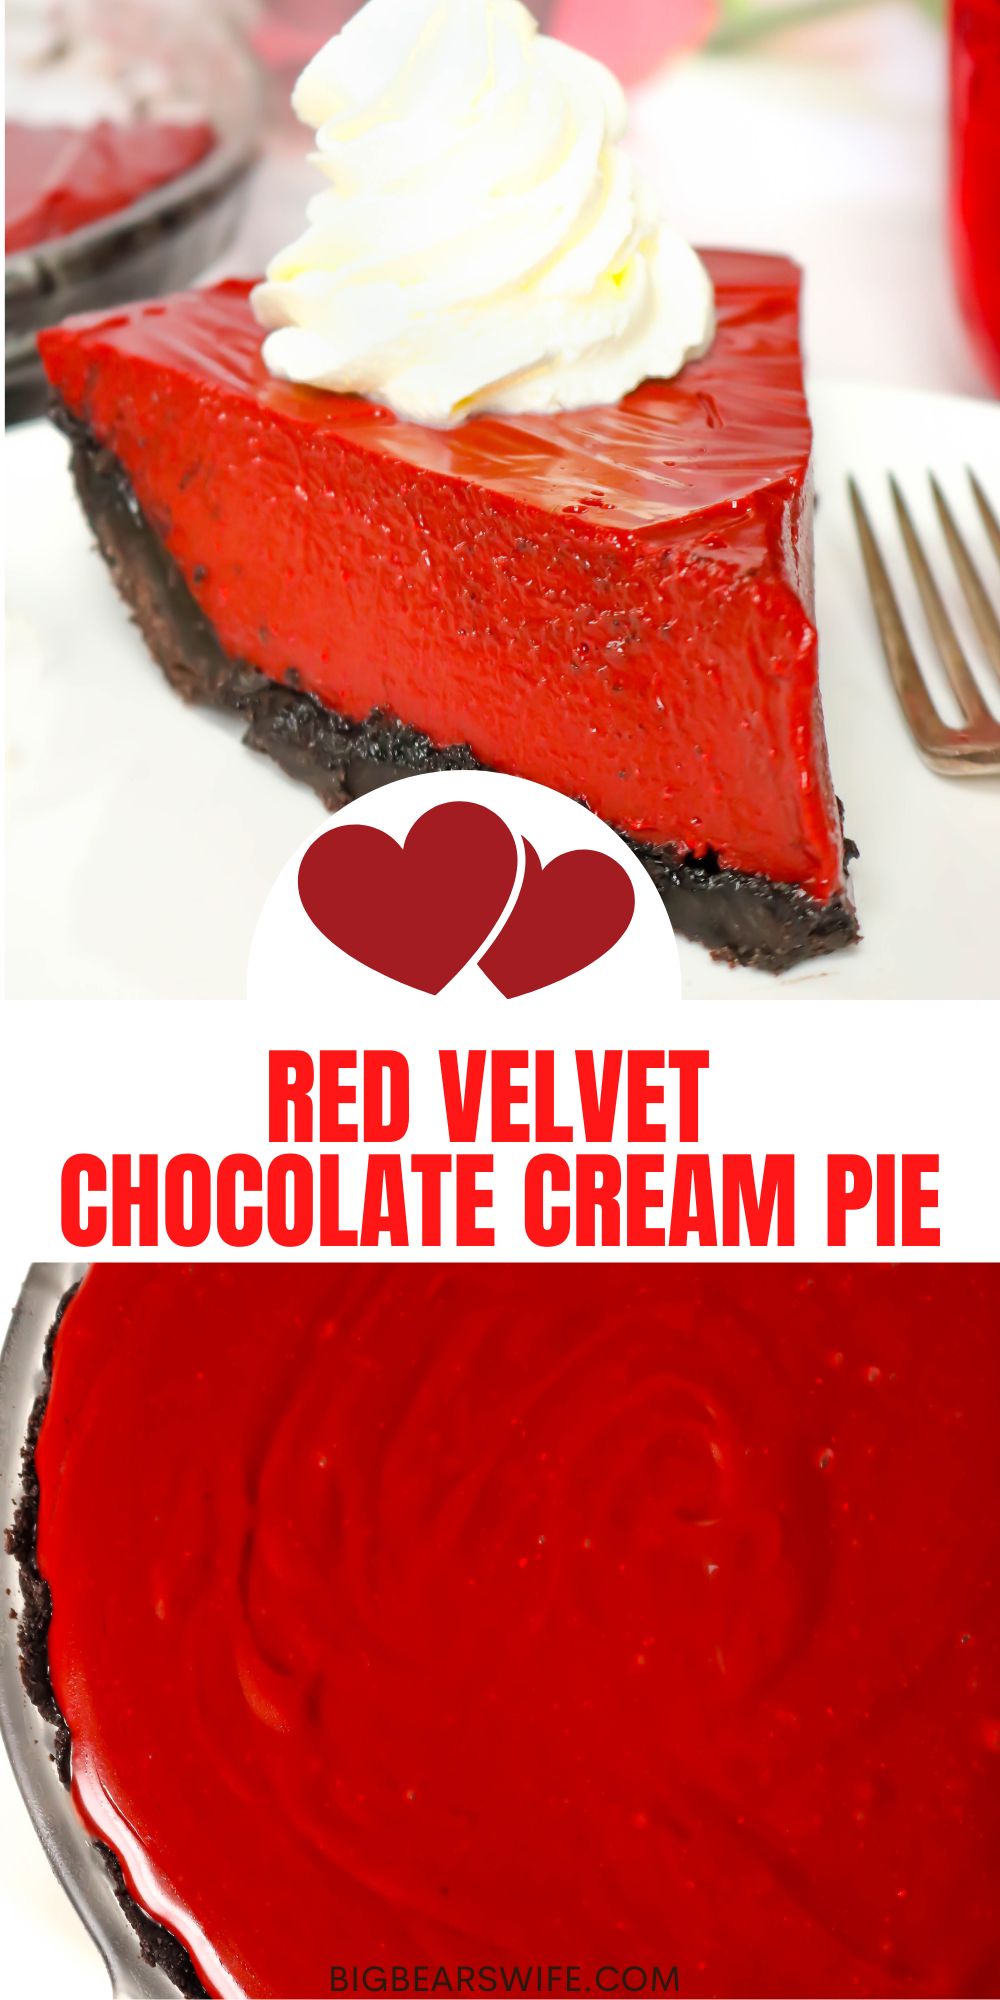 Dive into the classic flavor of red velvet with this homemade Red Velvet Chocolate Cream Pie! This pie has the tangy of red velvet, the silkiness of chocolate pie and a homemade chocolate cookie crust!   via @bigbearswife